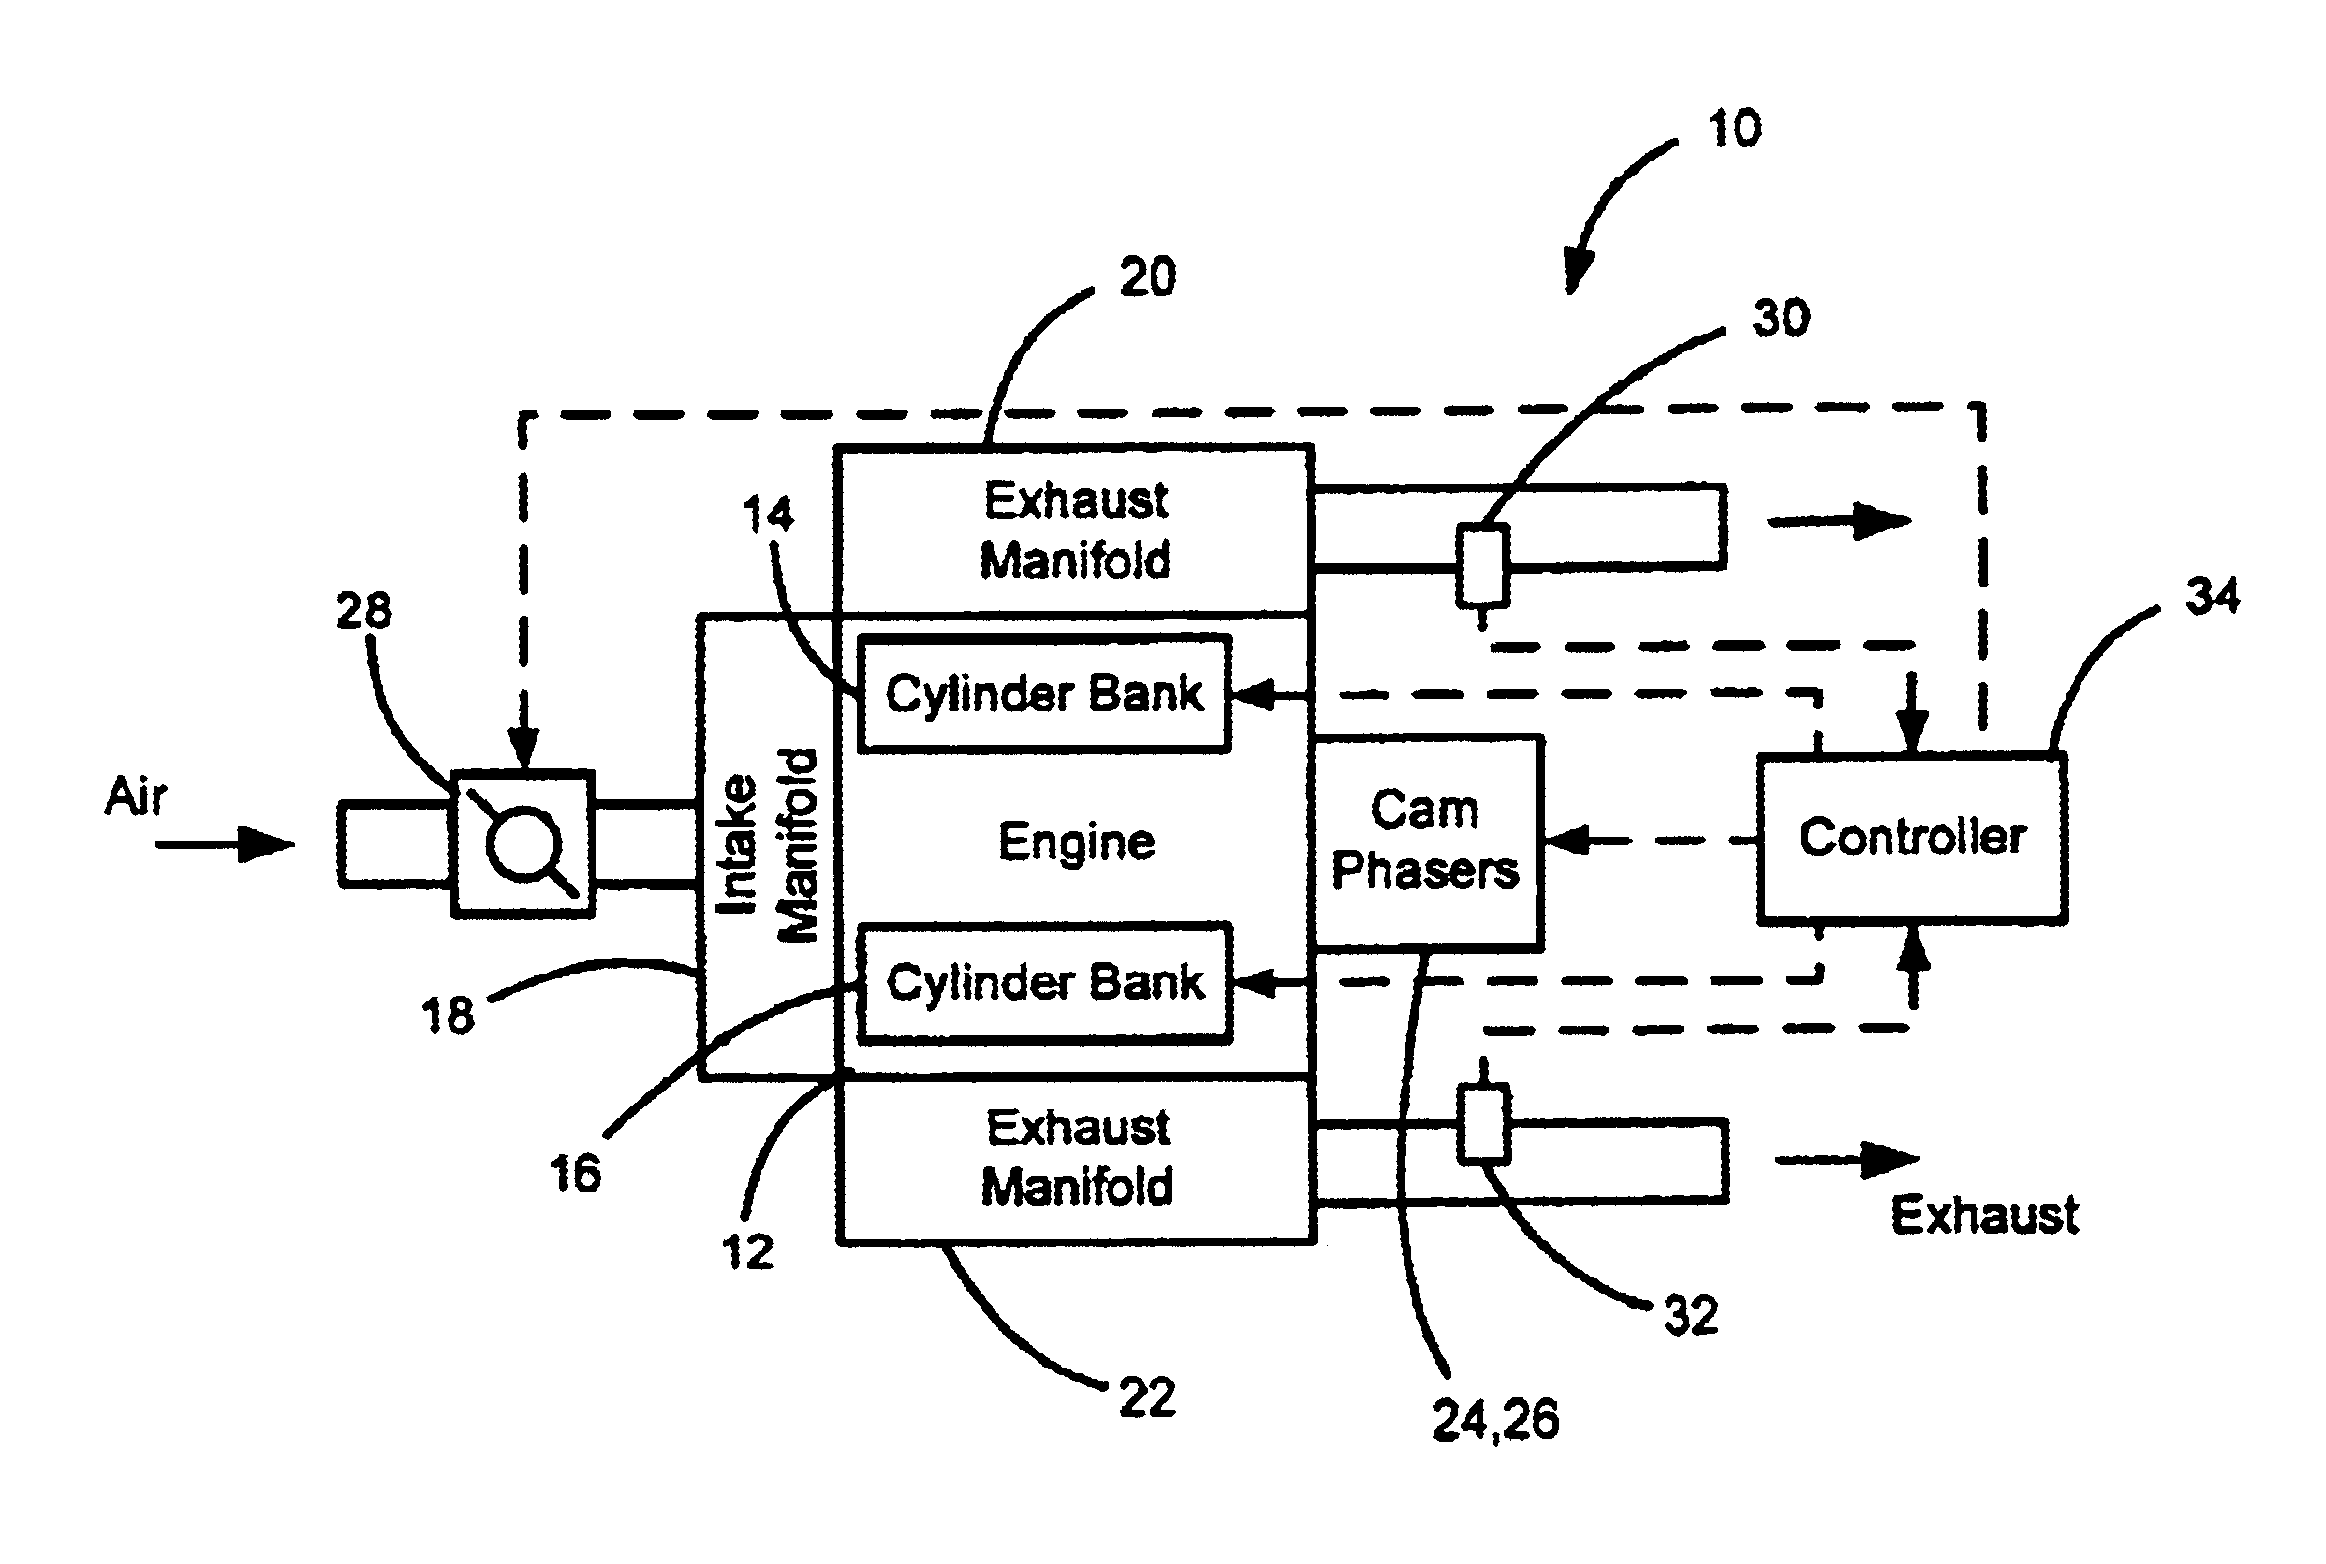 Cylinder bank work output balancing based on exhaust gas A/F ratio